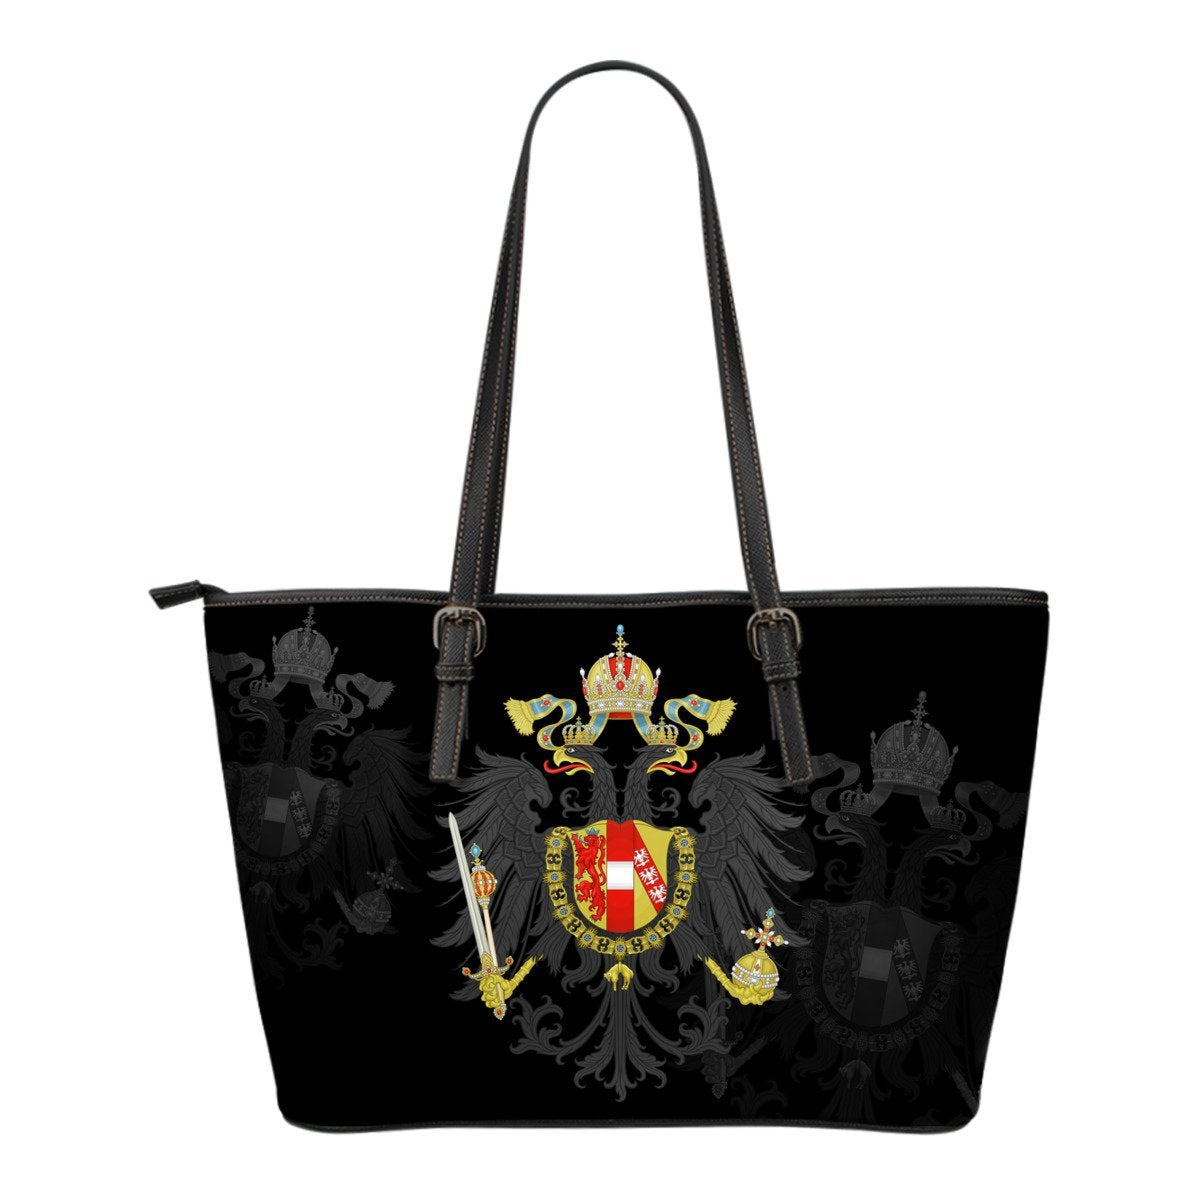 austrian-empire-leather-tote-bag-small-size